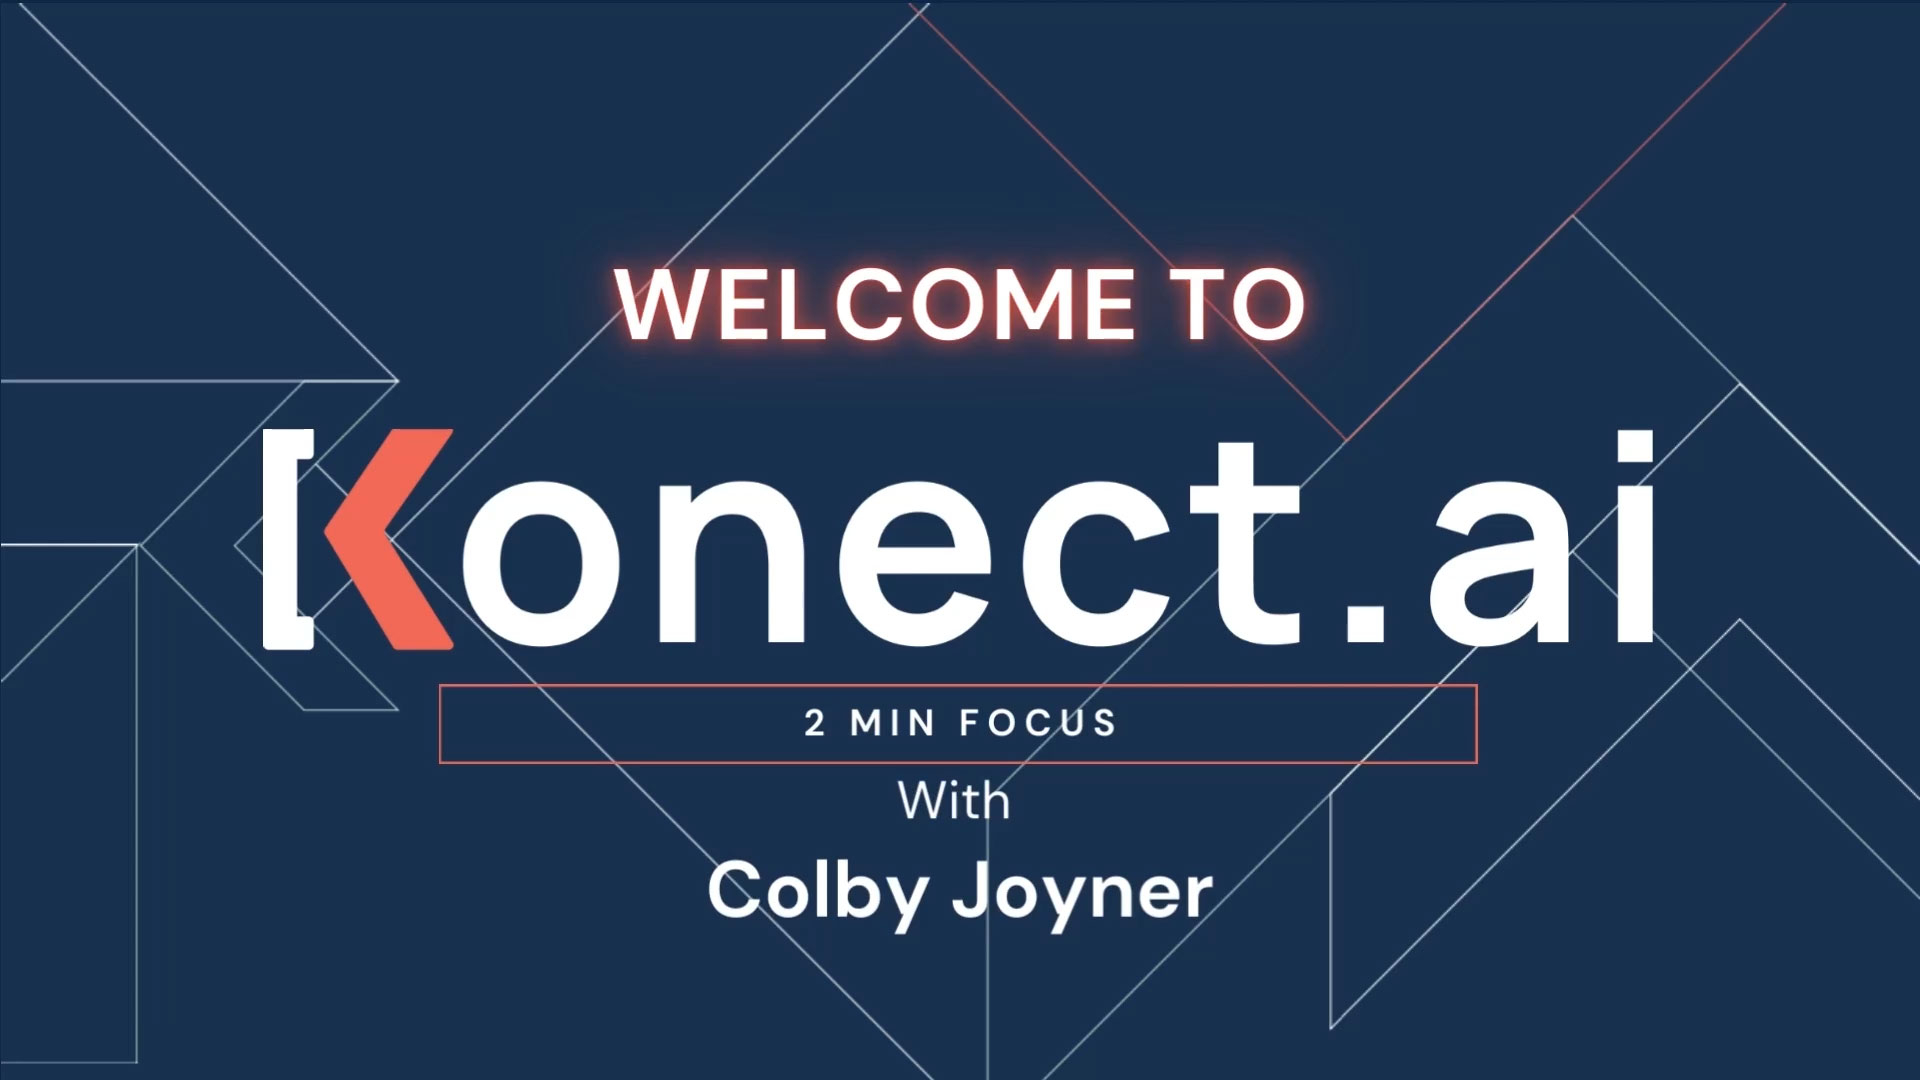 Colby Joyner, Vice President of Sales at Konect.ai, shares the company's vision and how it can help dealers by using AI technology without disrupting current systems.